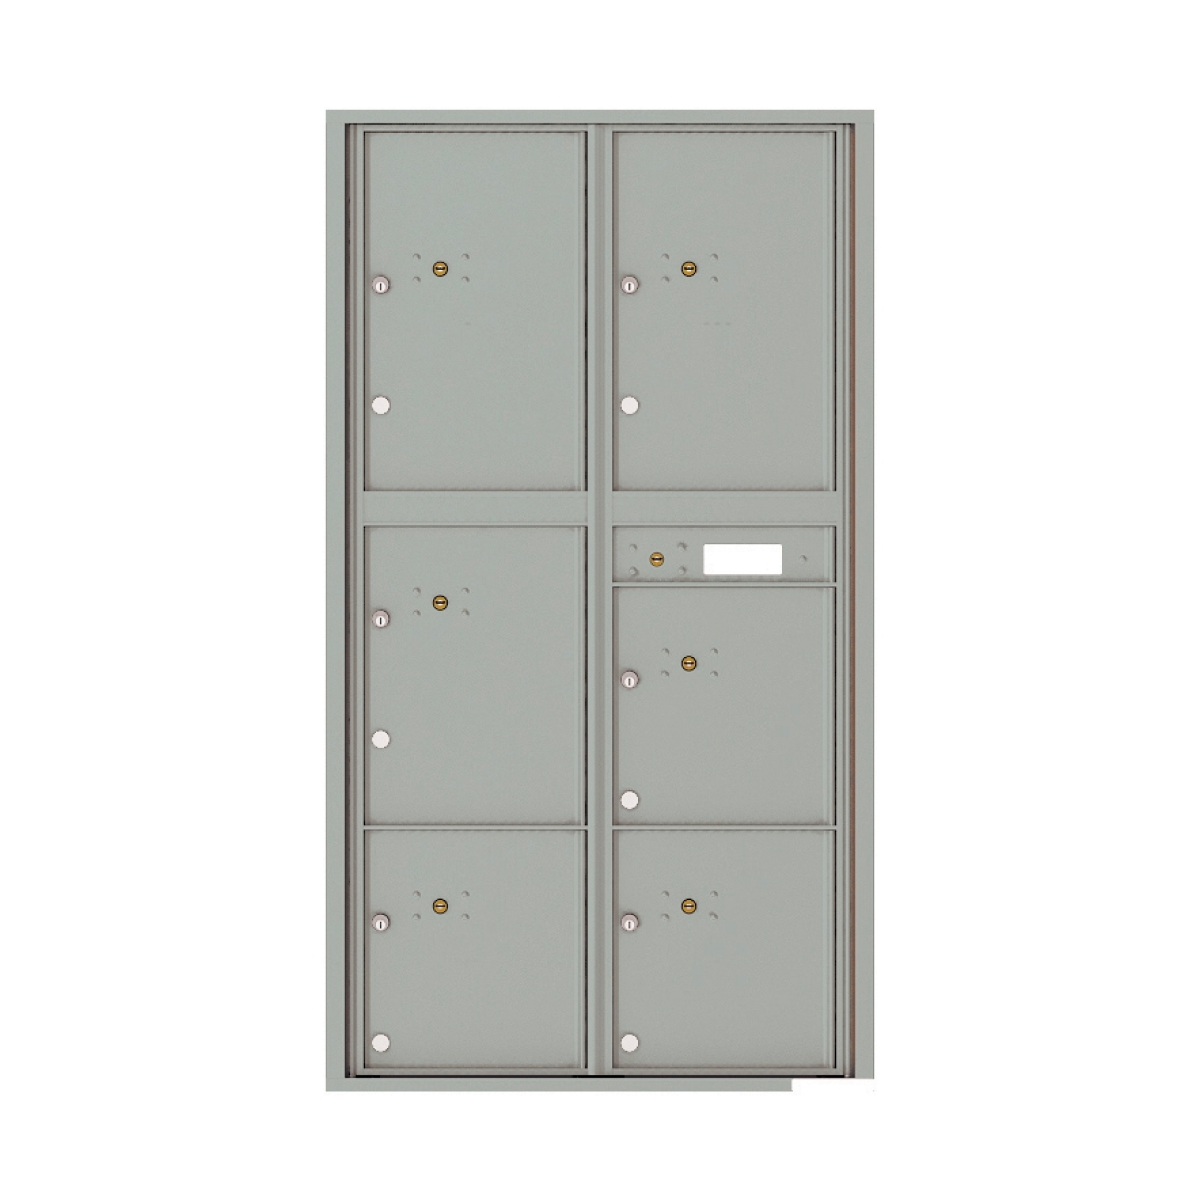 Surface Mount 4C Horizontal Mailbox – 6 Parcel Locker – Front Loading – 4C16D-6P-4CSM16D – USPS Approved Product Image